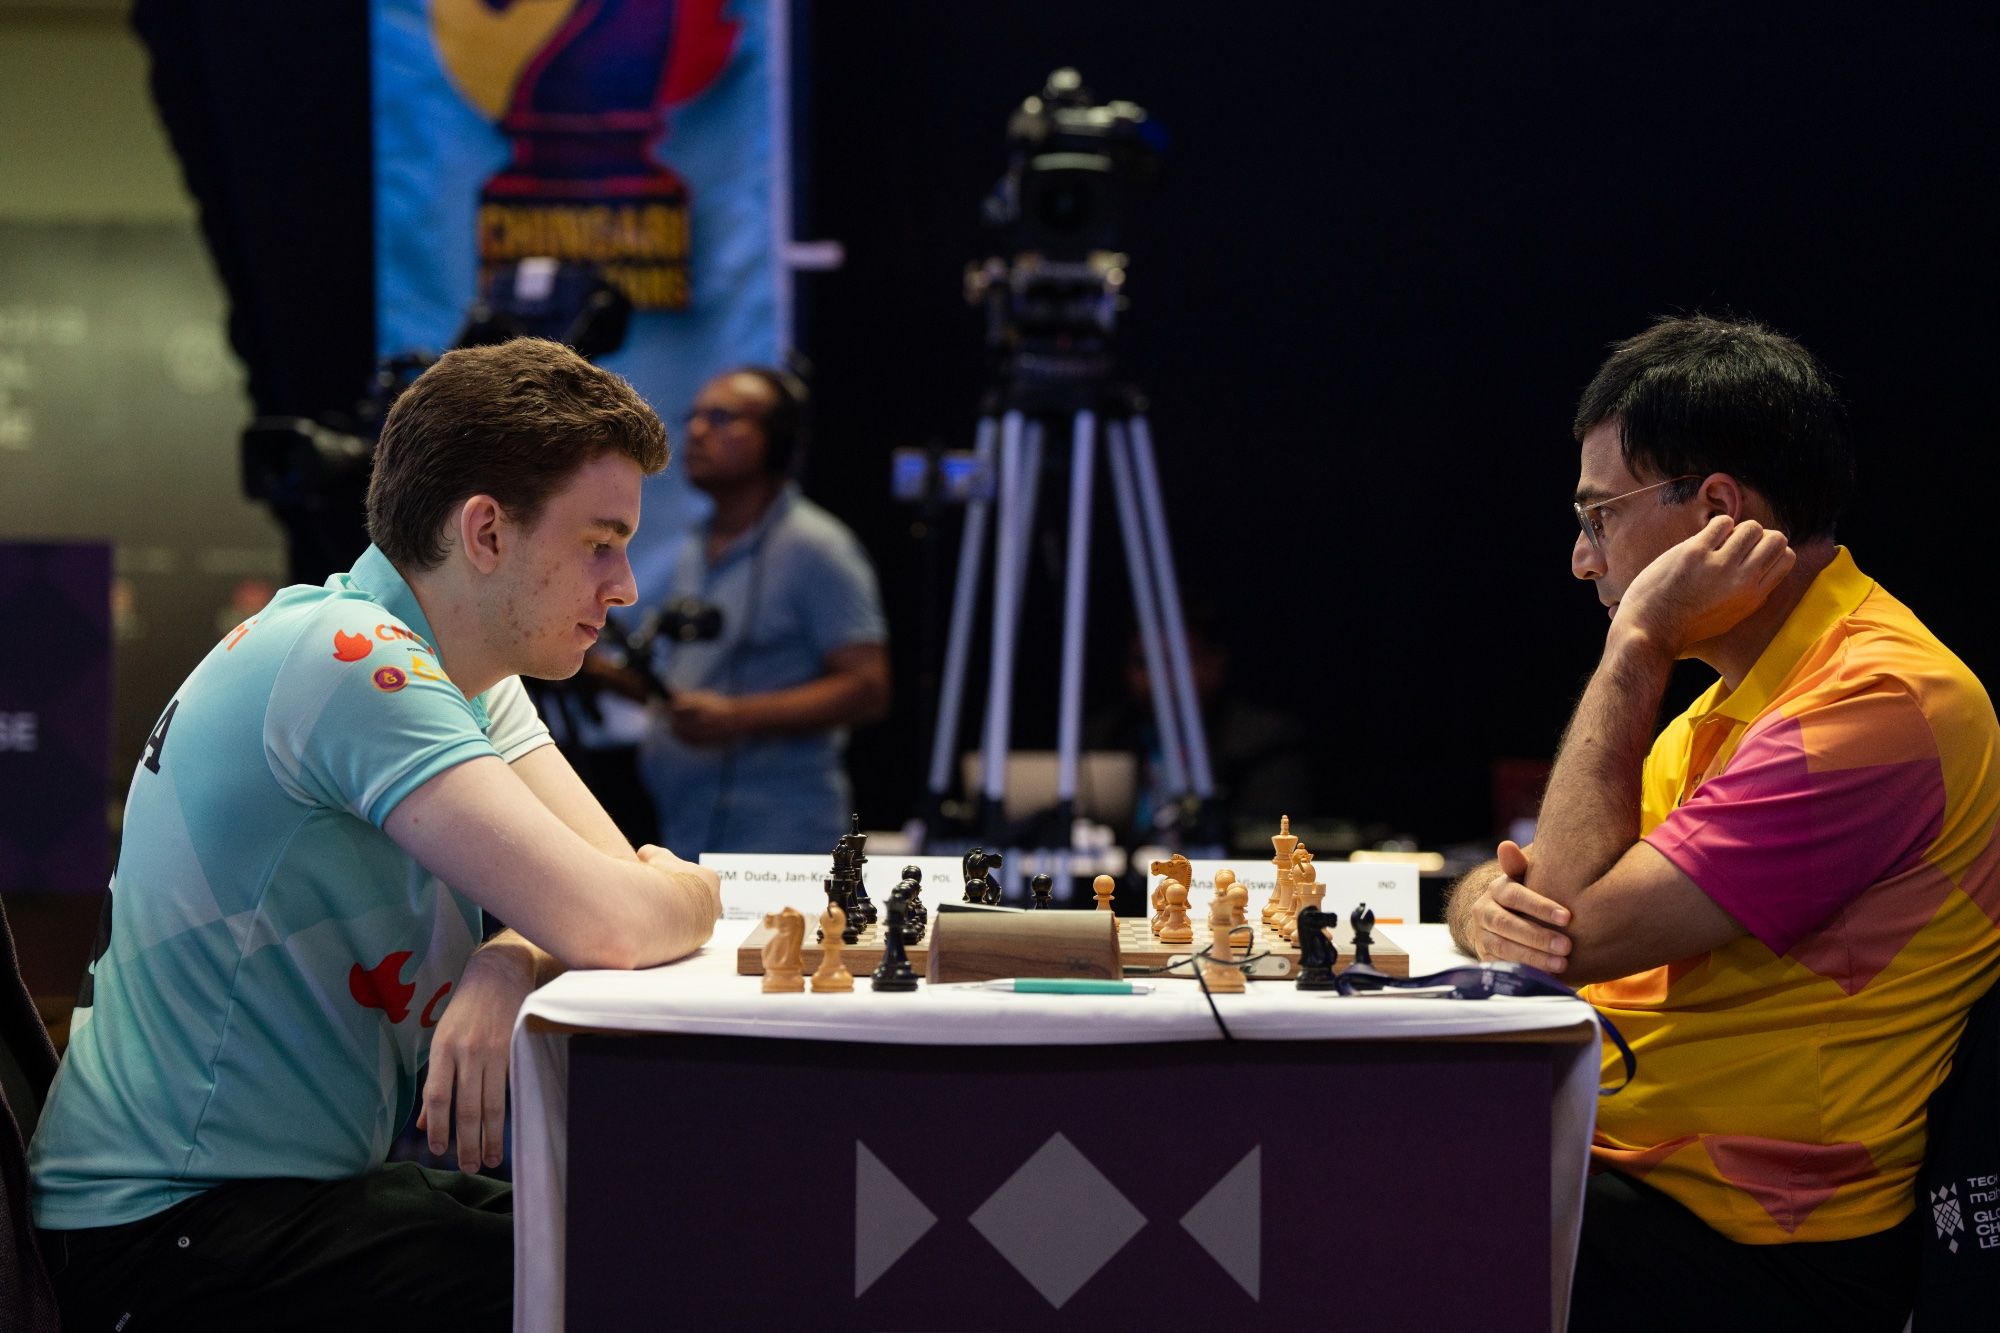 Chess: China's Ding Liren could make unlikely late bid for Candidates place, Chess